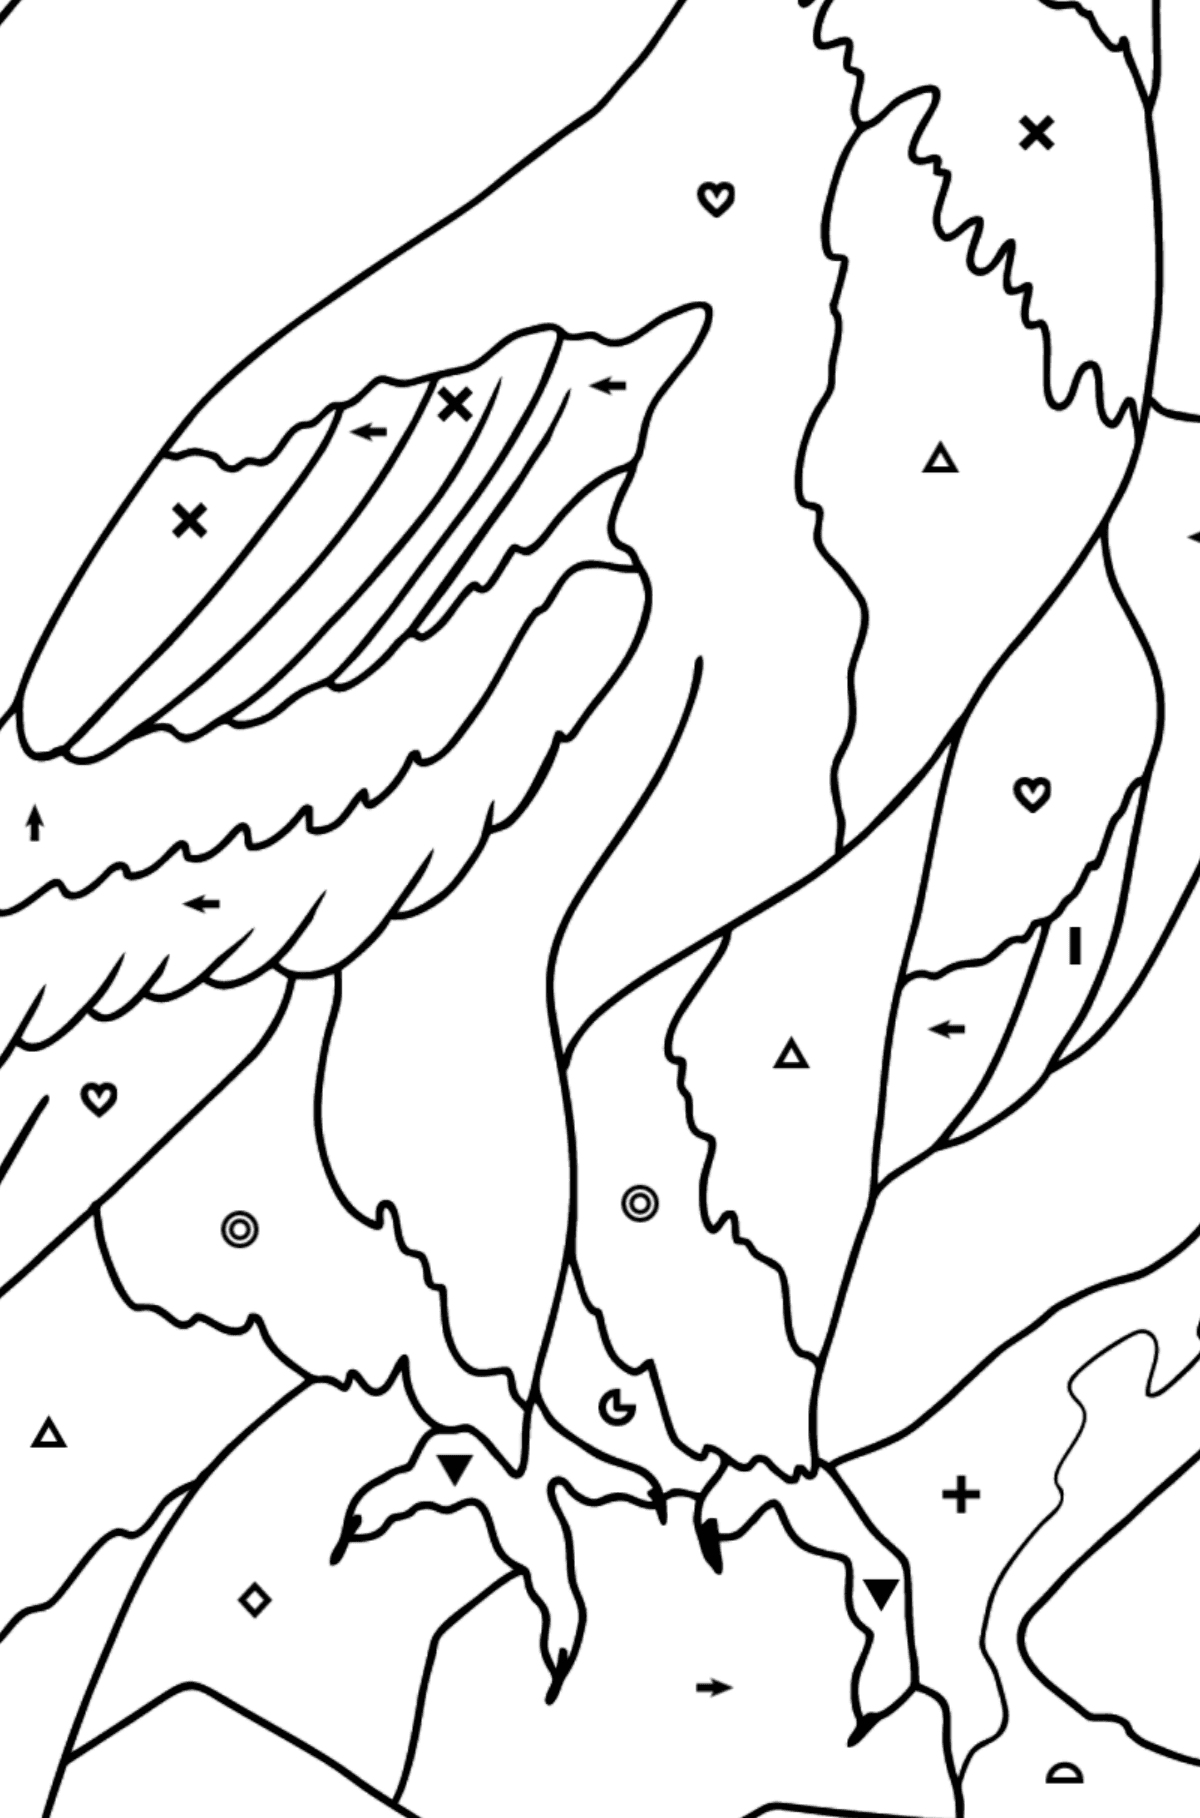 Coloring Page - An Eagle is Looking for Prey - Coloring by Symbols and Geometric Shapes for Kids